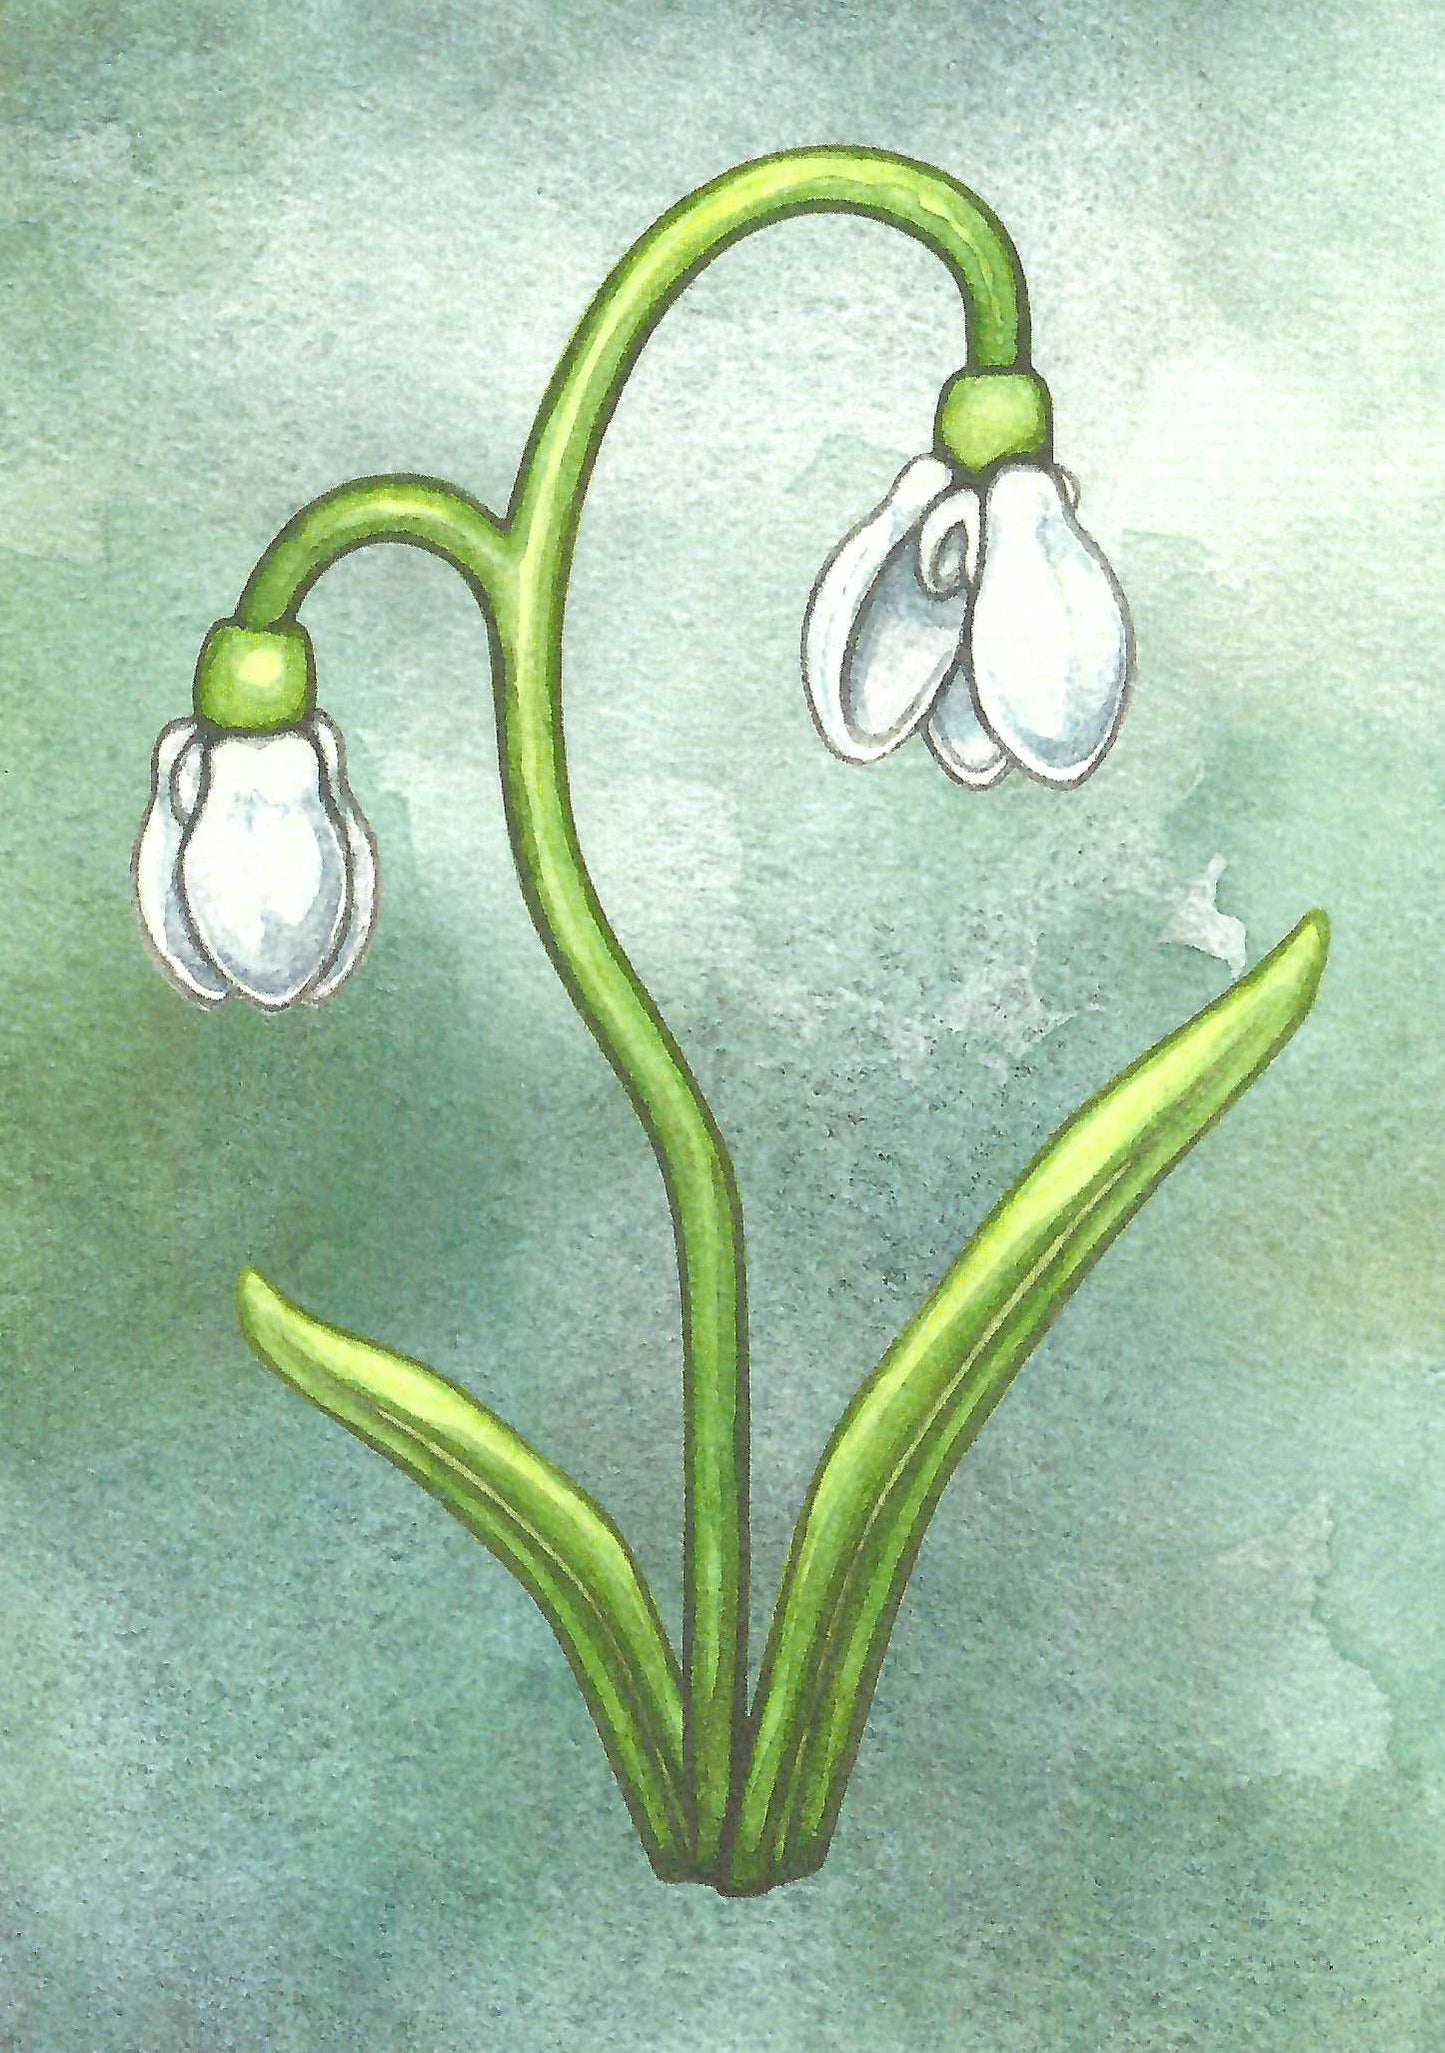 Snow Drop Greeting Card.    A casually elegant greeting card designed to be shared or displayed as a work of art.    Description  A whimsical watercolor illustration by Jessica Waterstradt from the book, "The Acorn and the Oak."  A complementary illustration is featured on the inside.